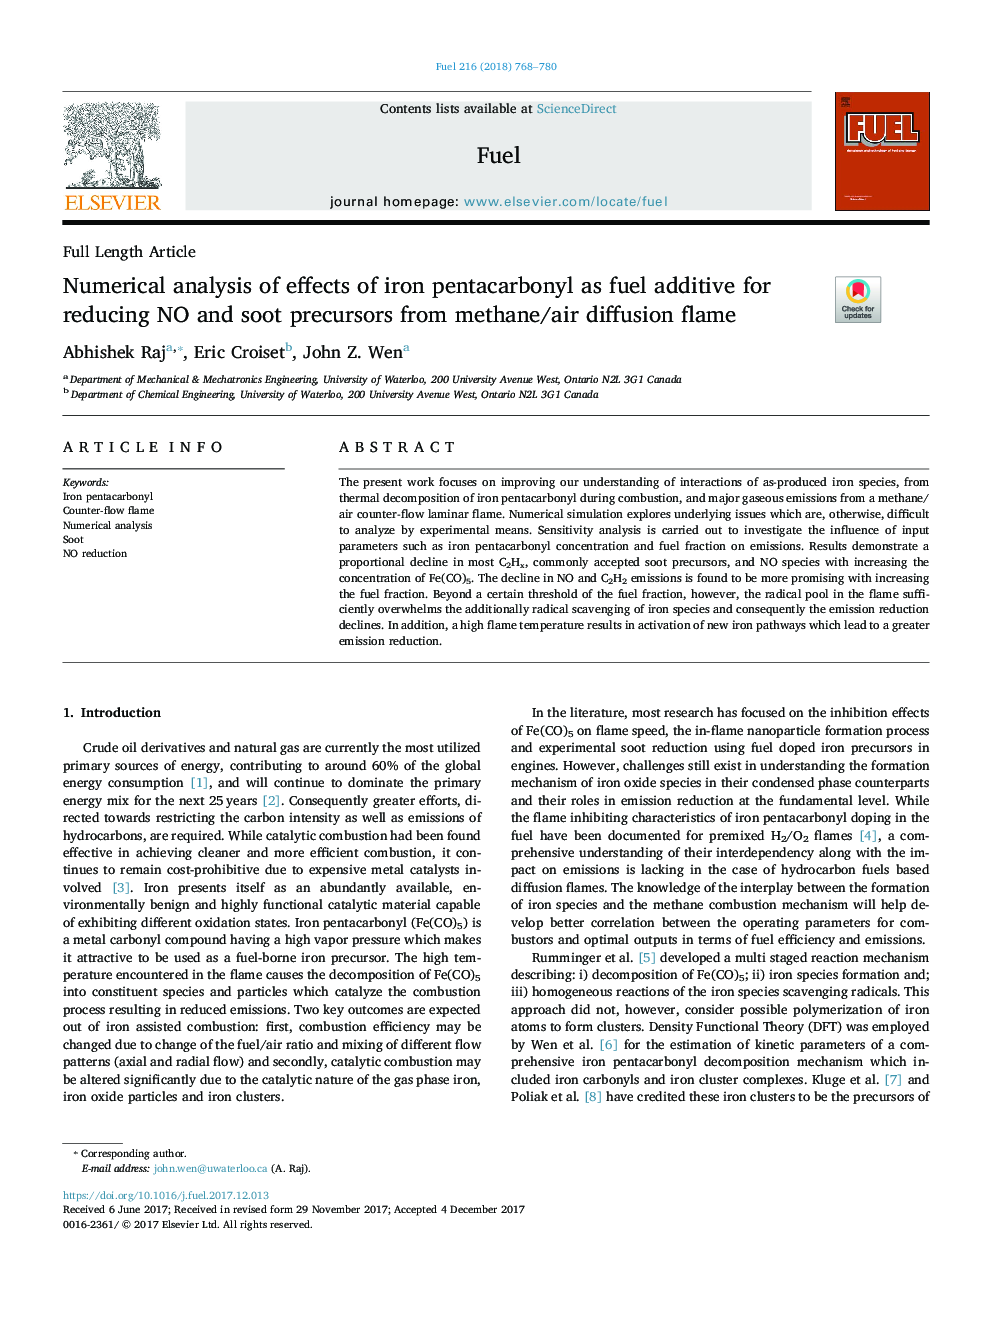 Numerical analysis of effects of iron pentacarbonyl as fuel additive for reducing NO and soot precursors from methane/air diffusion flame